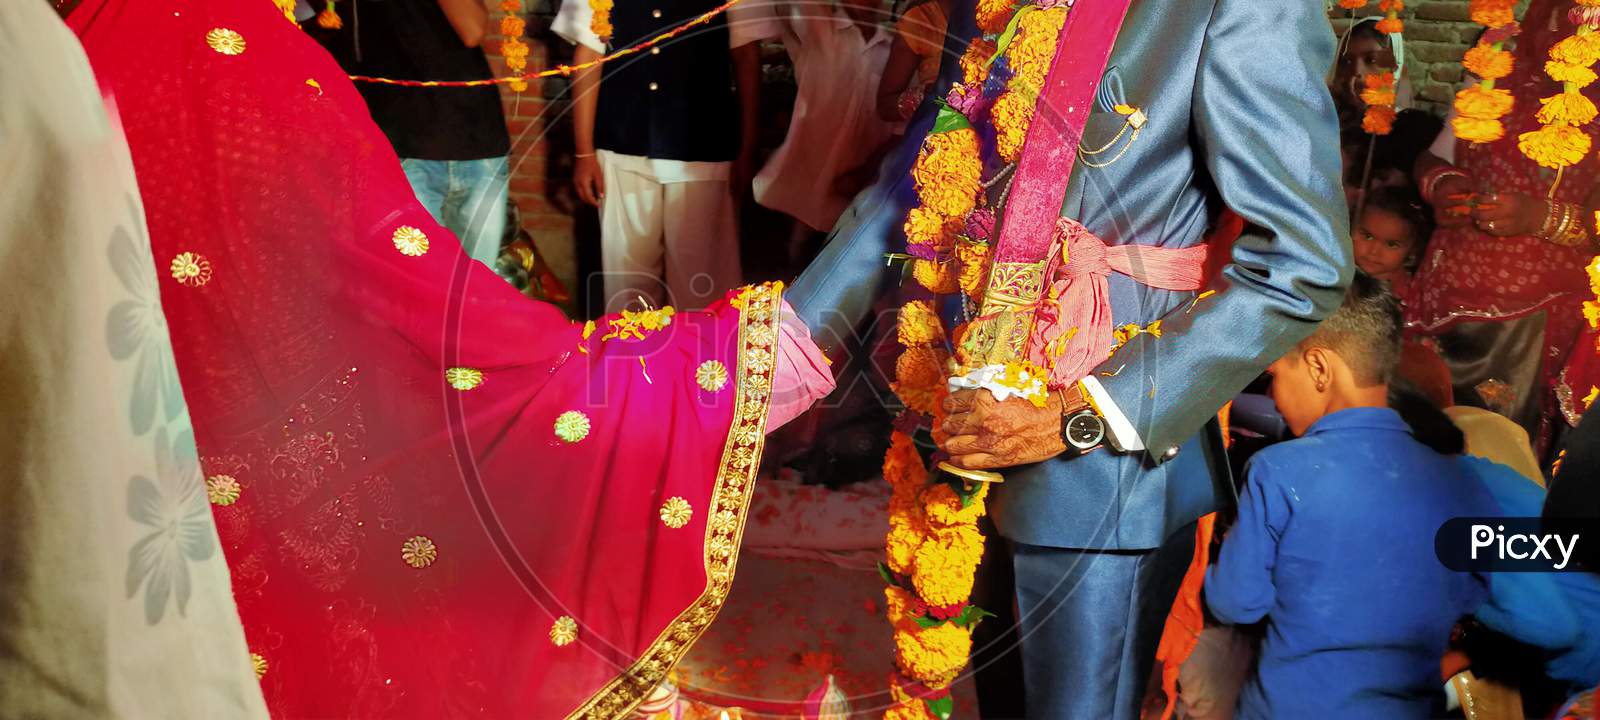 The traditional Rajasthani Indian Marriage